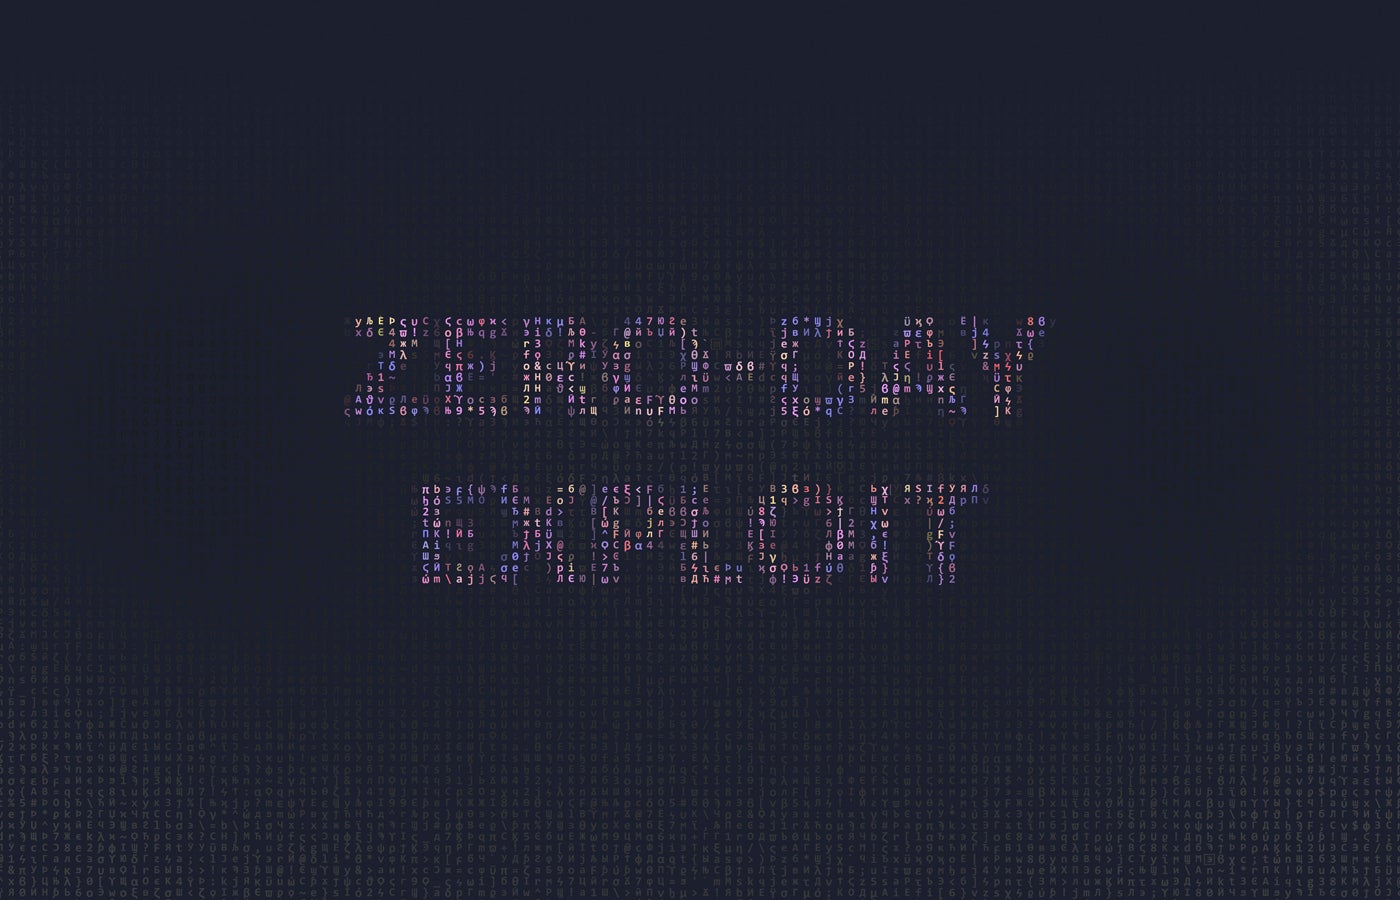 zero-day-exploits:-definition-&-how-it-works-(with-examples)